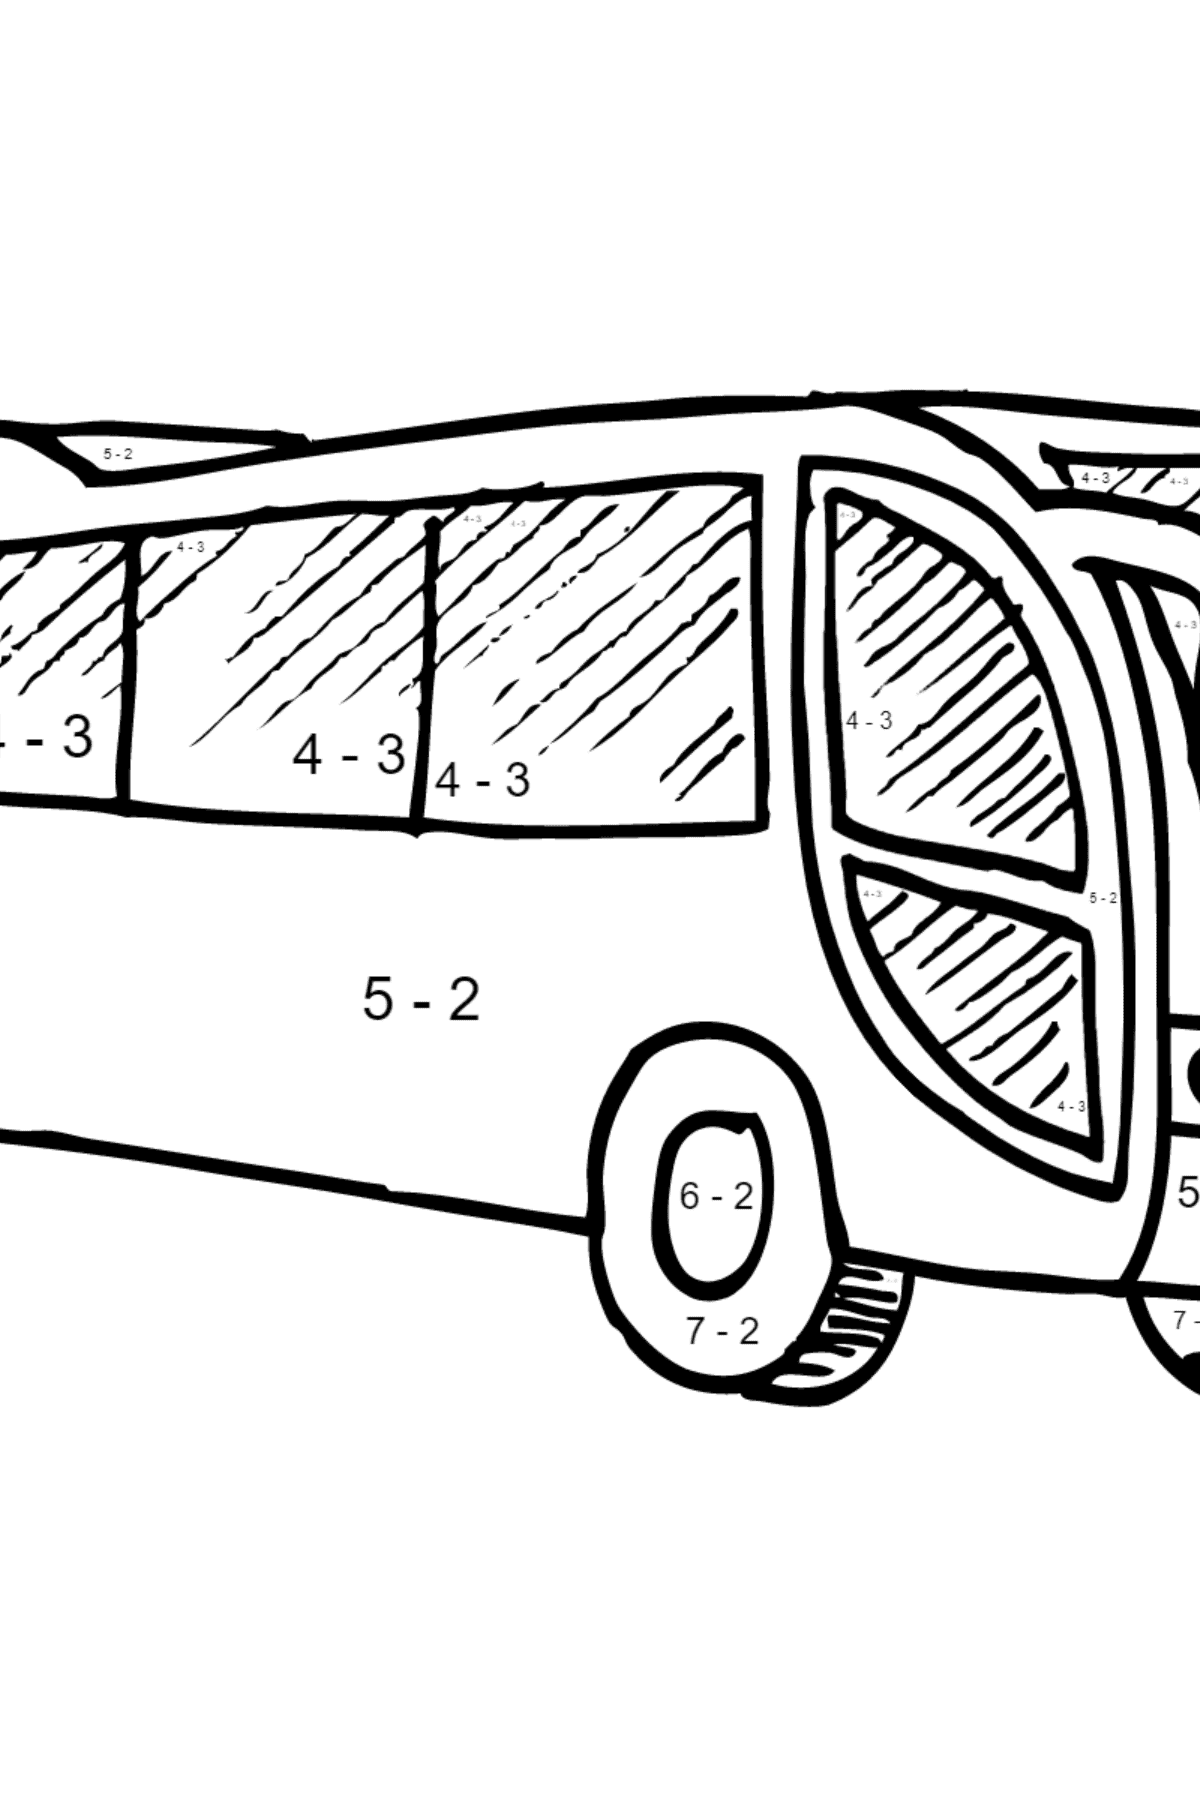 Coloring Page - A Bus is Having Rest - Math Coloring - Subtraction for Kids